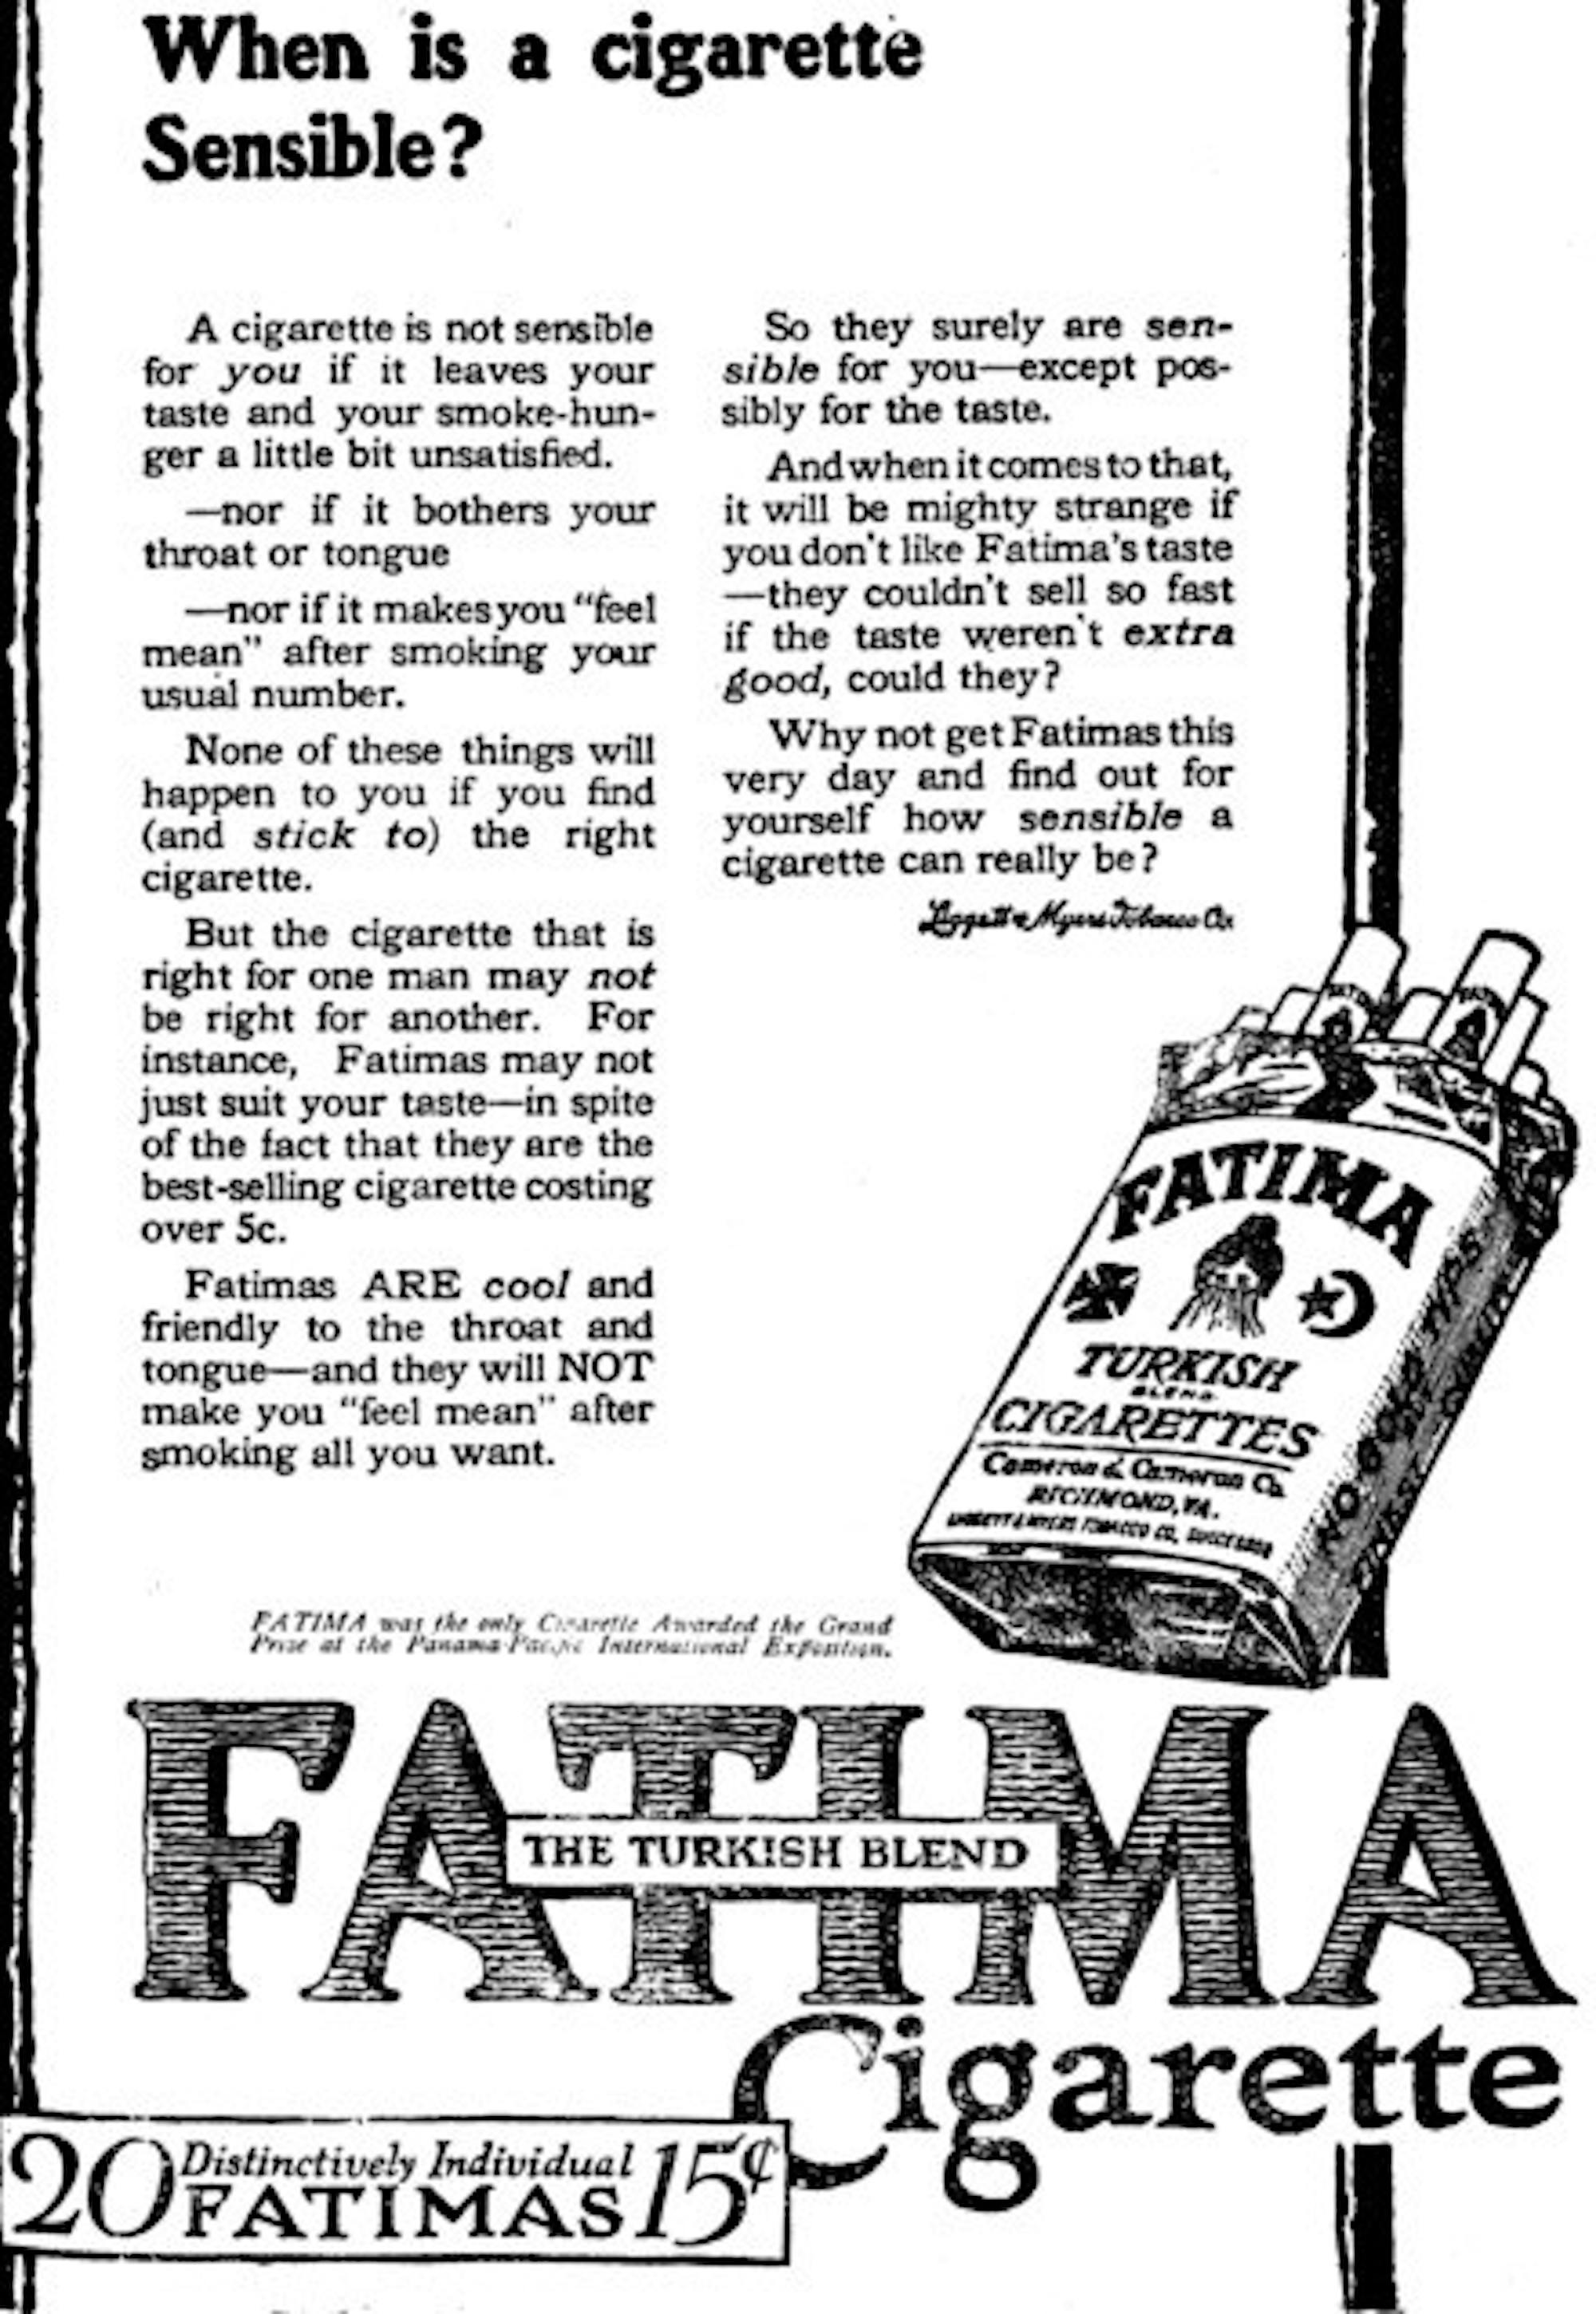 This advertisement was printed in The Dartmouth on Sept. 23, 1915